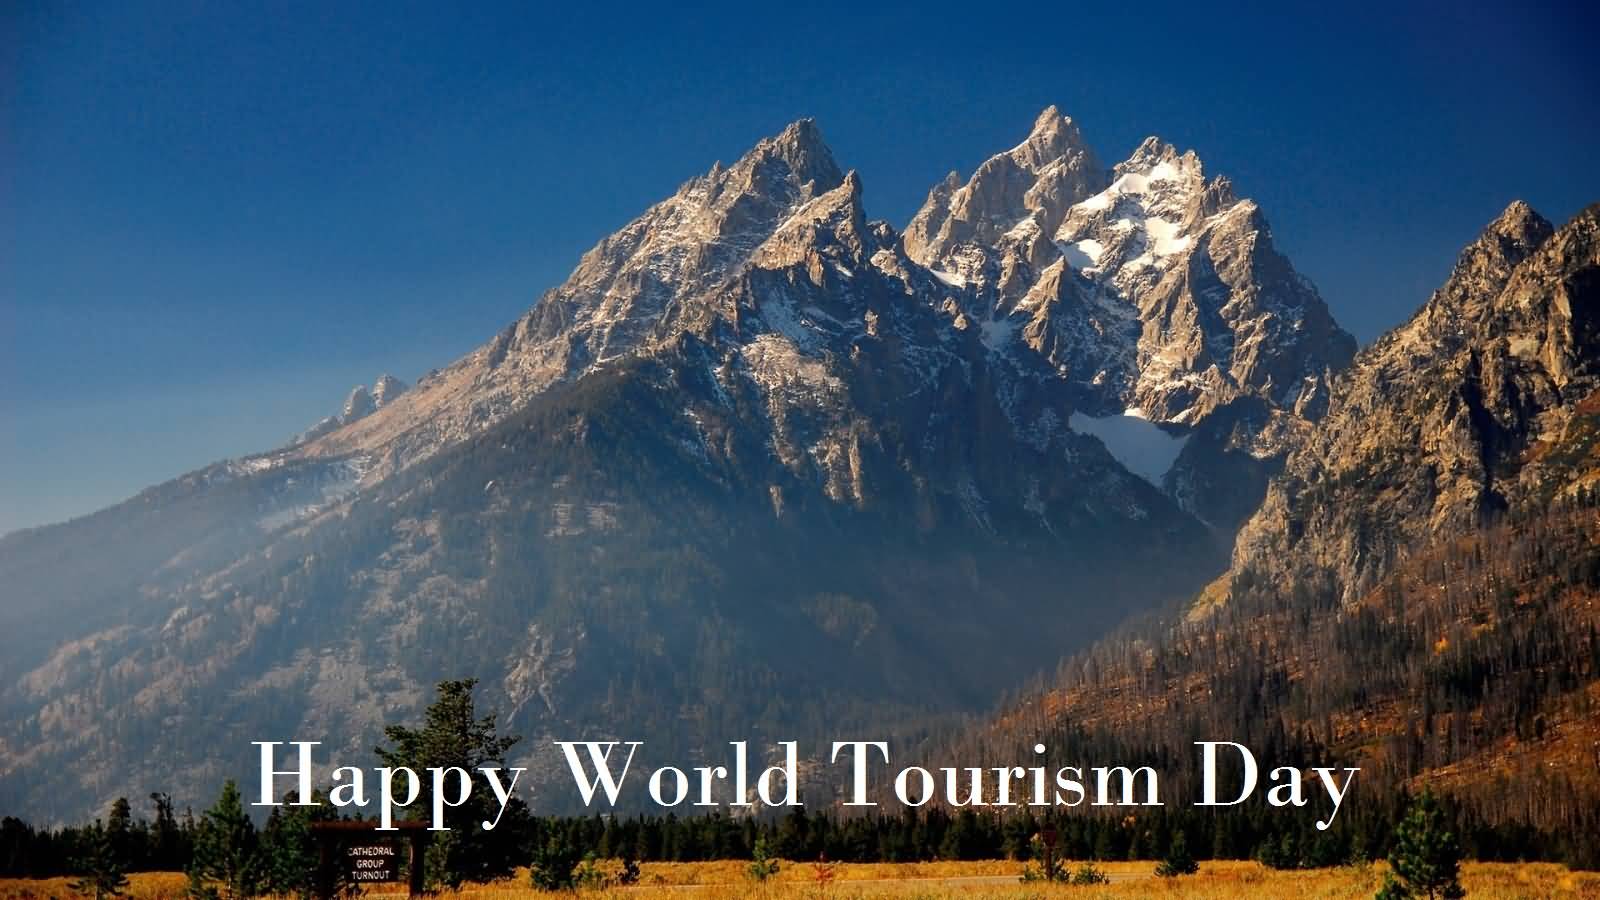 Happy World Tourism Day Amazing Mountains View In Background